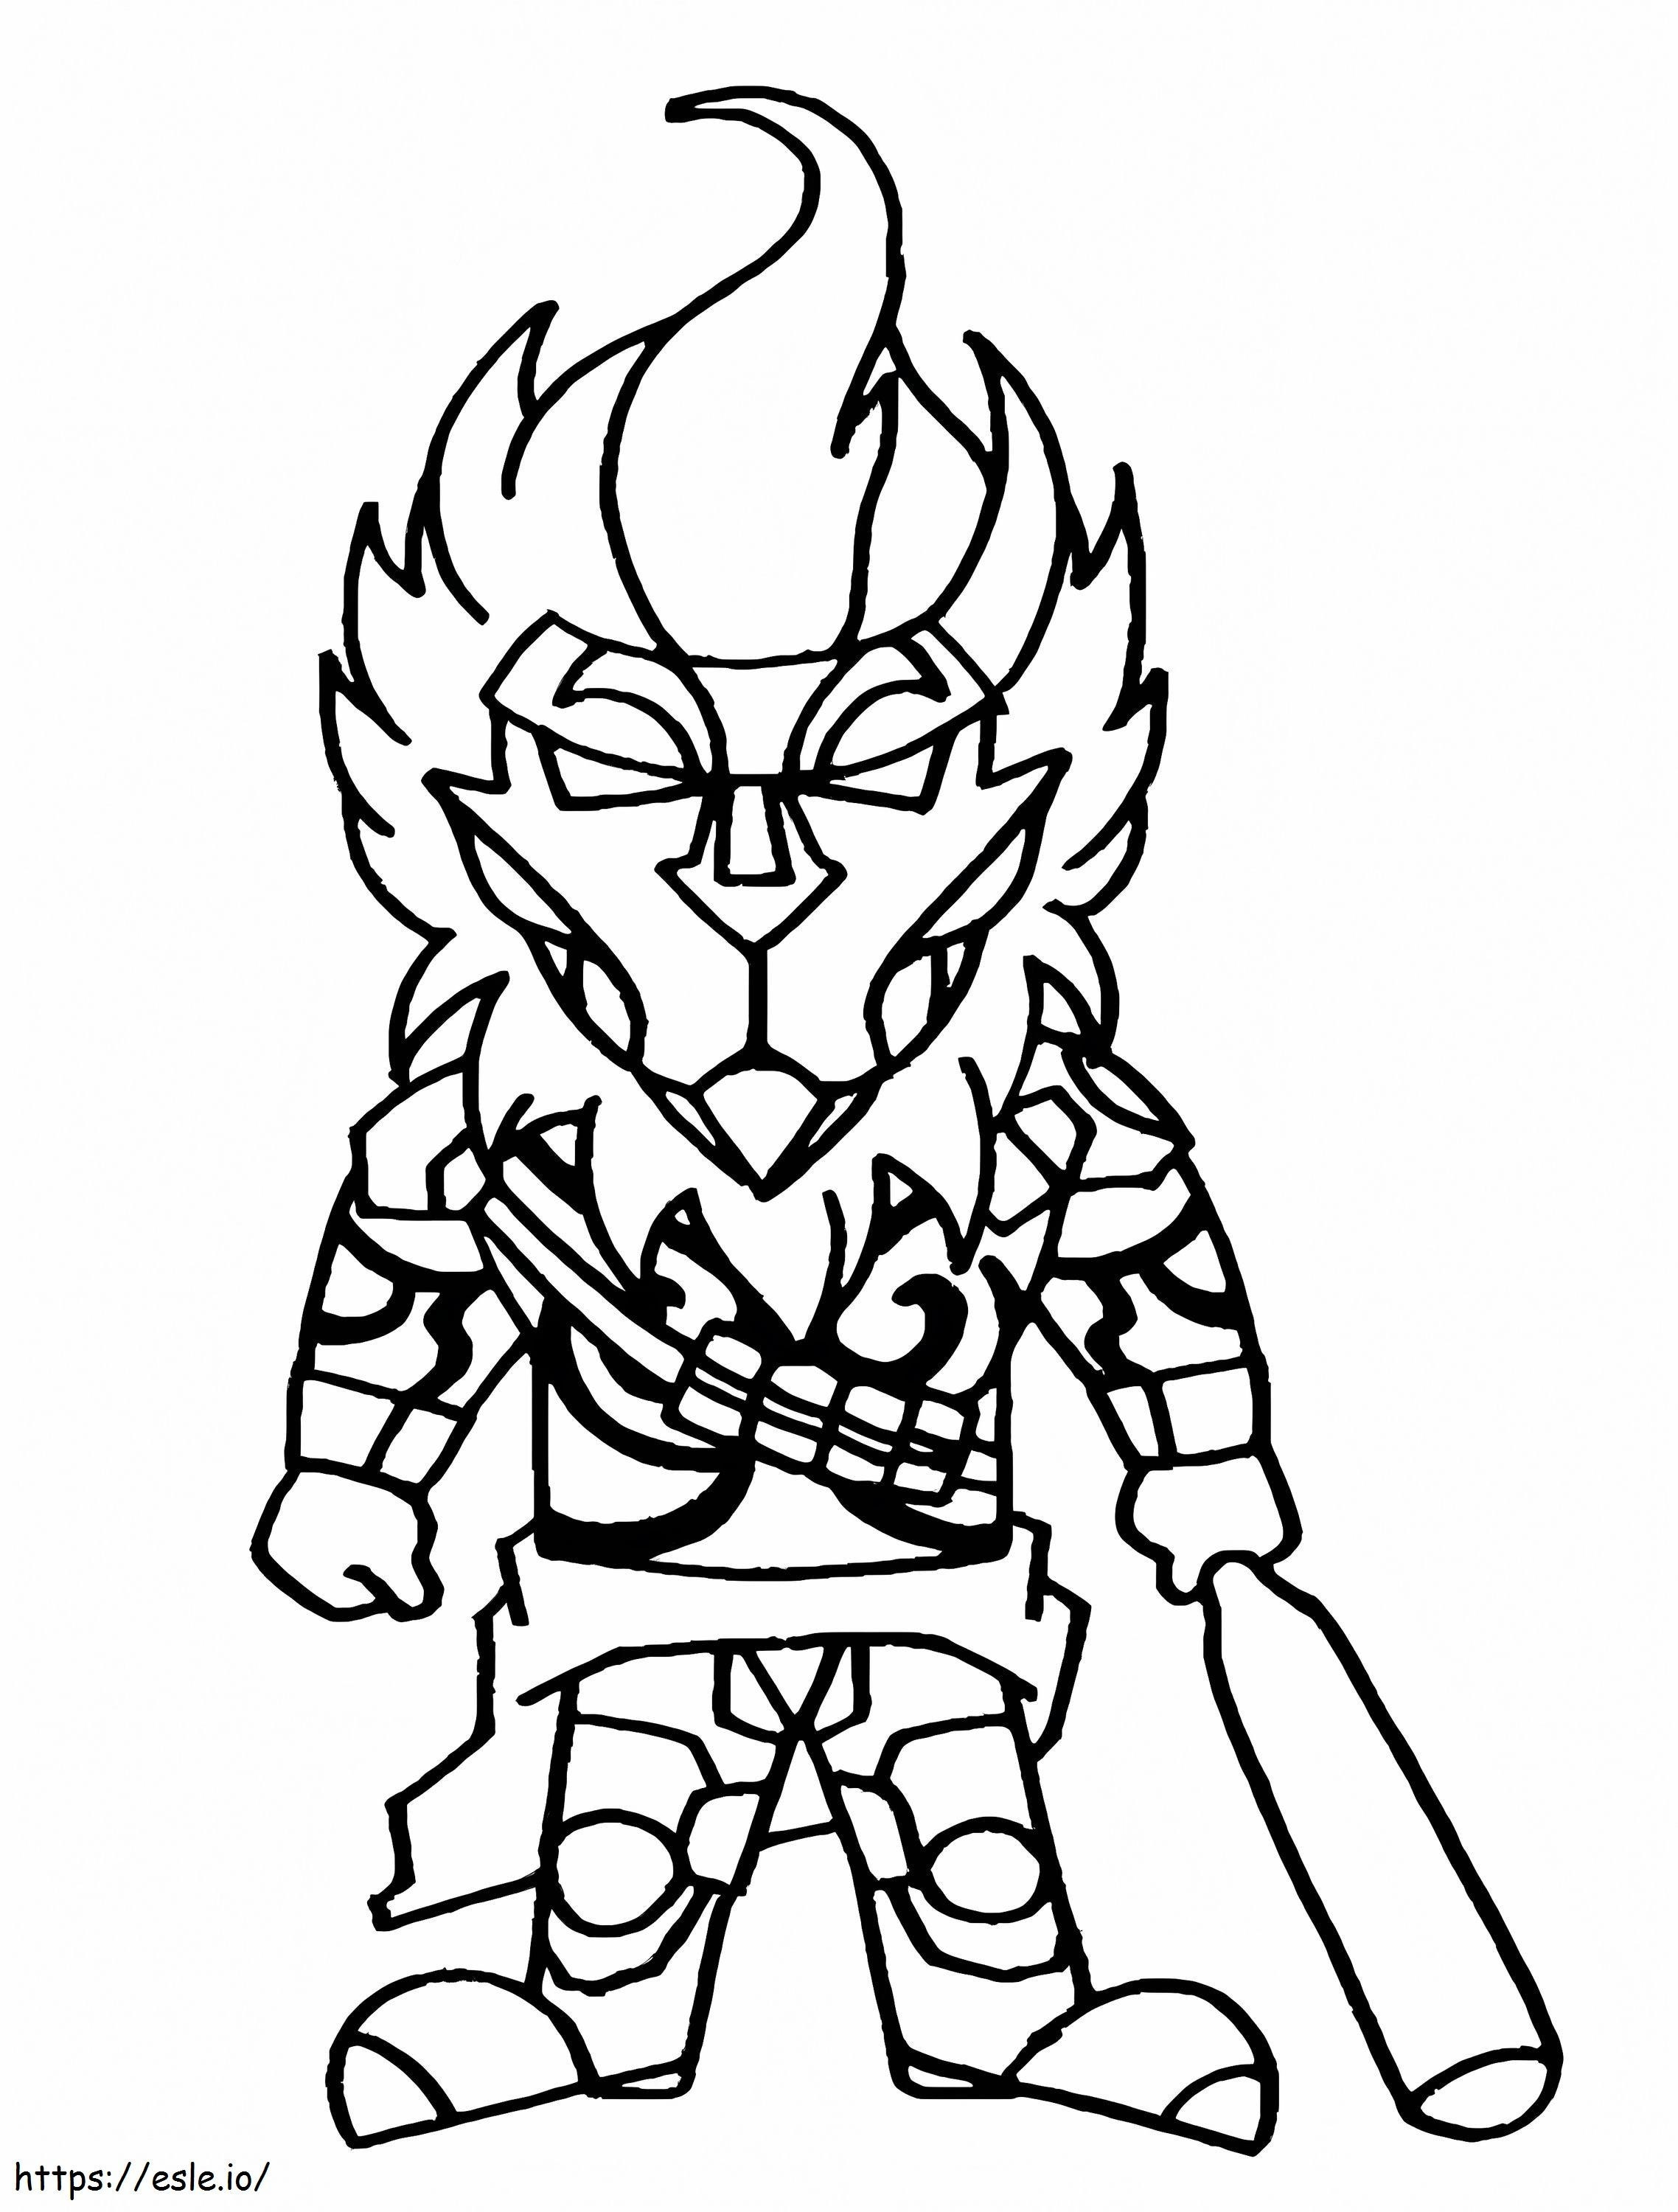 Monkey King Free Fire coloring page